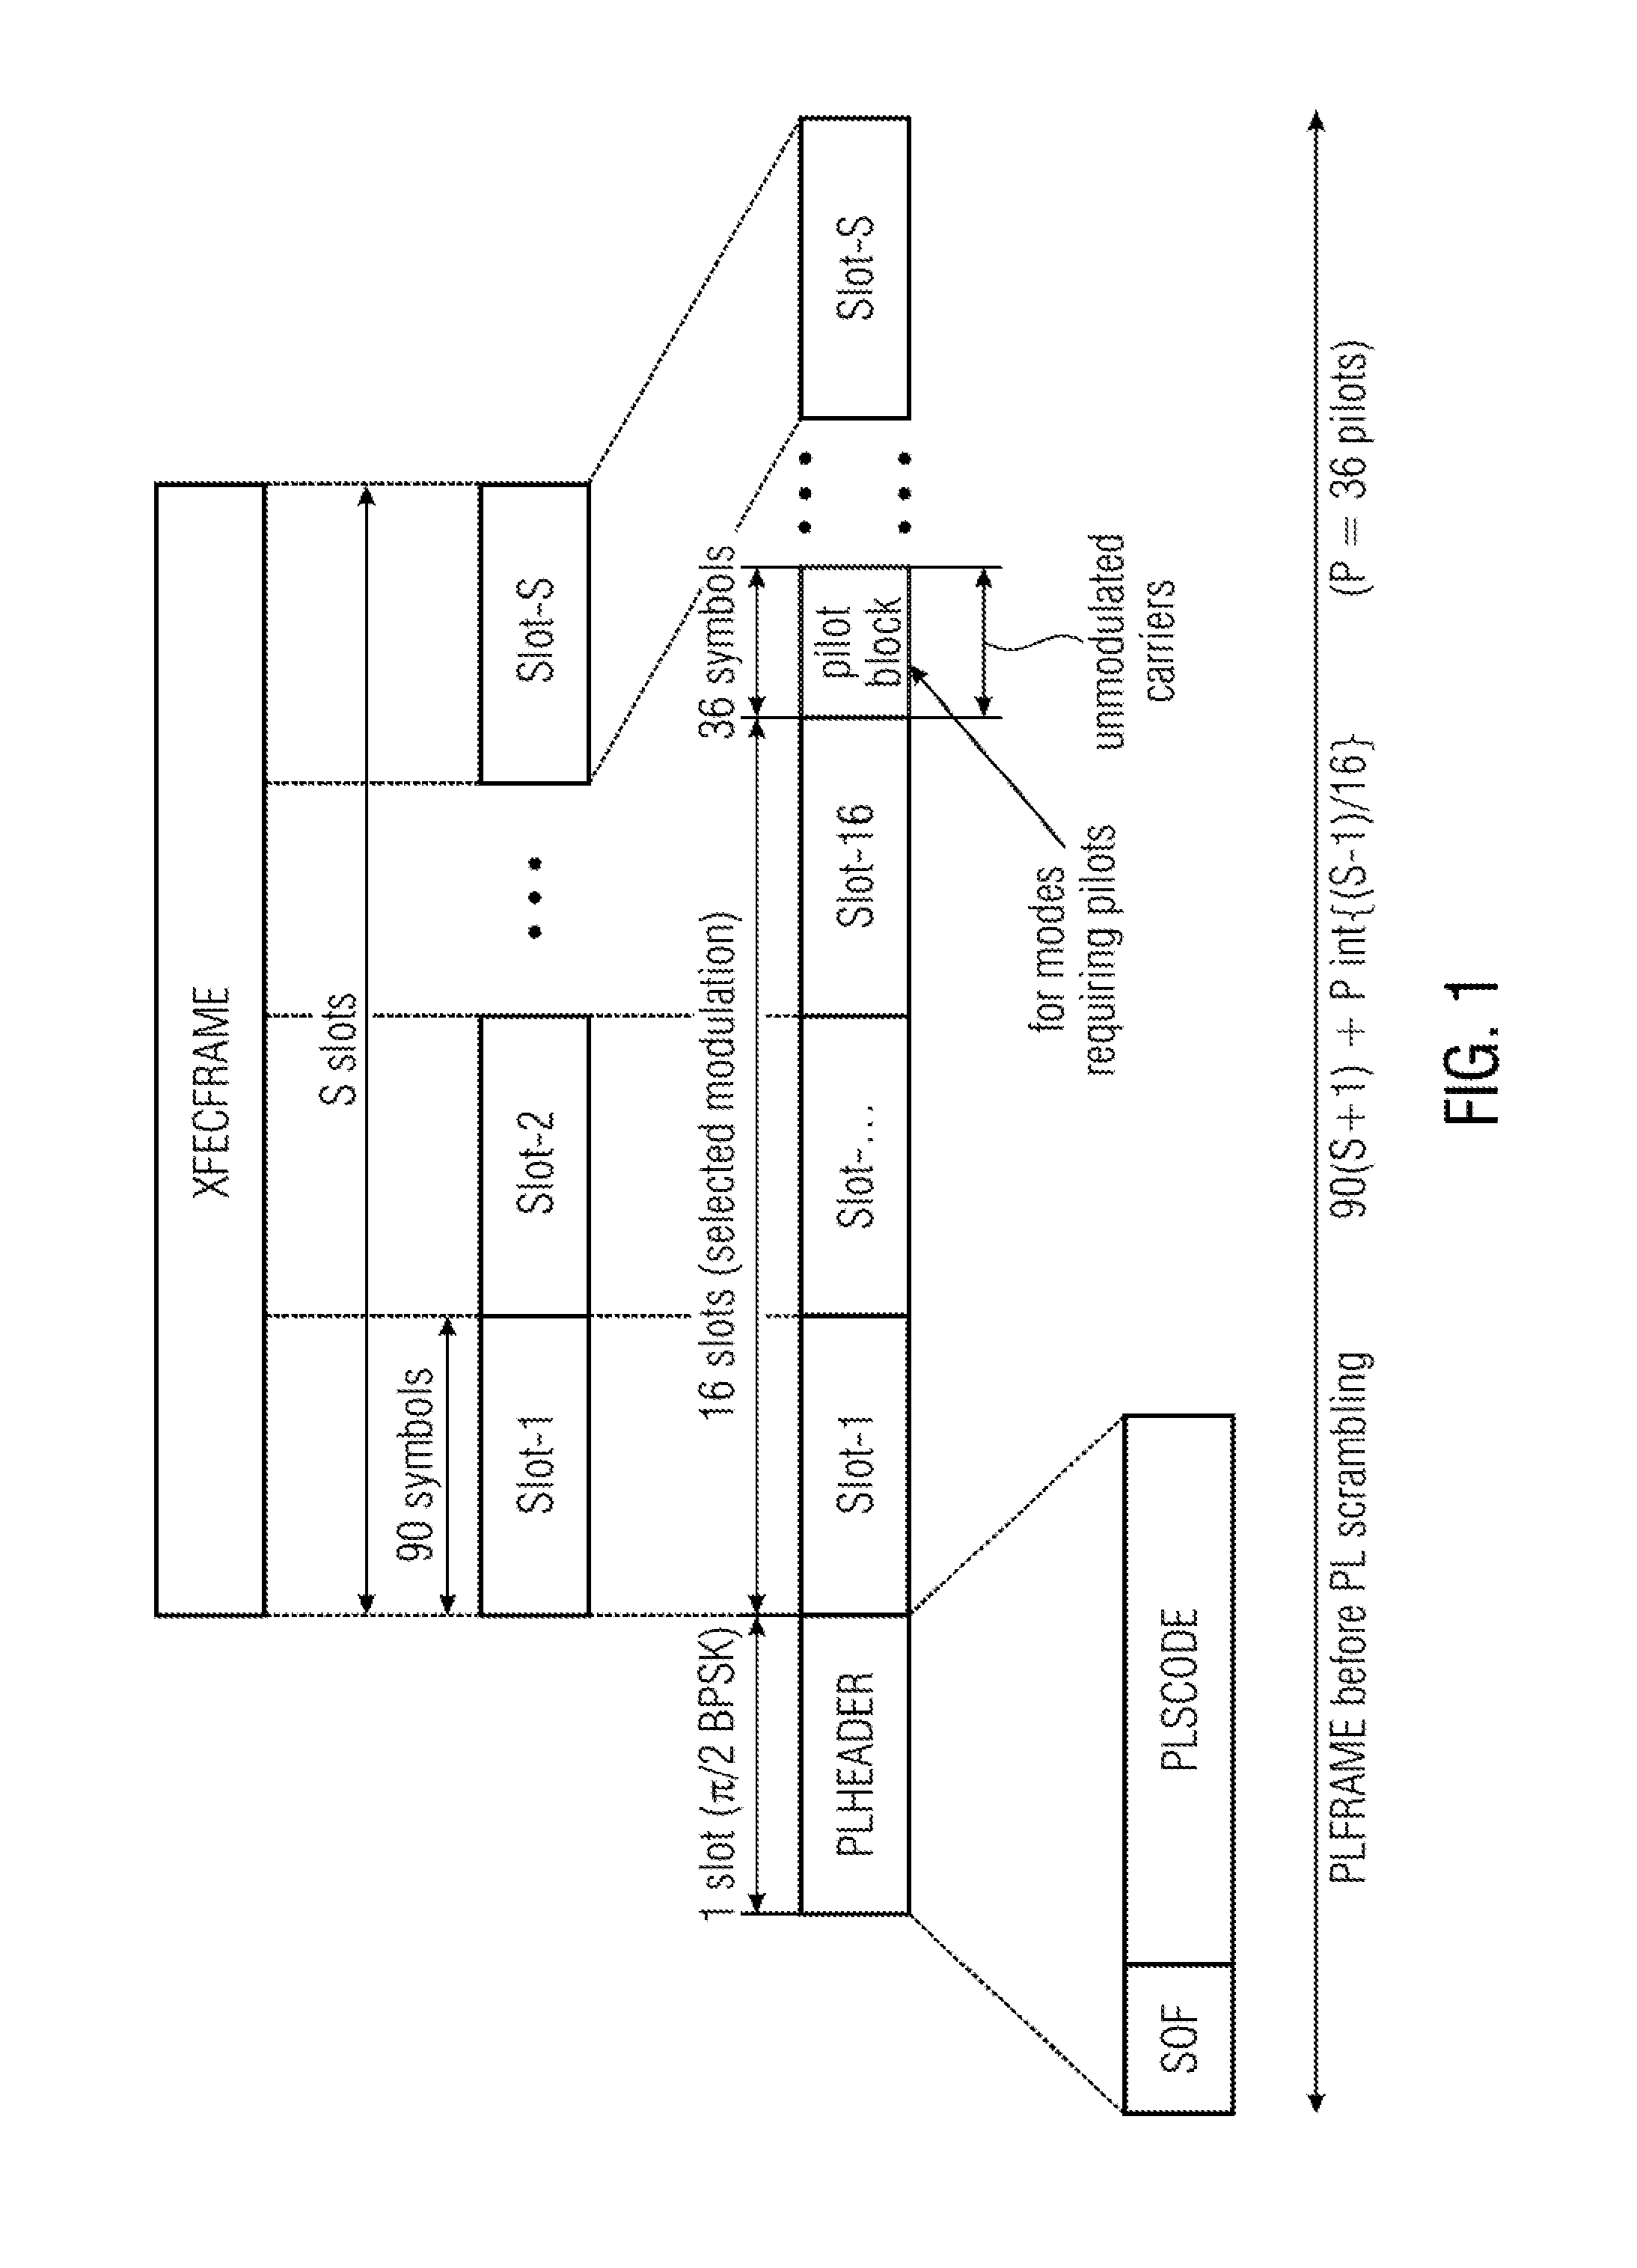 Two-stage signaling for transmission of a datastream